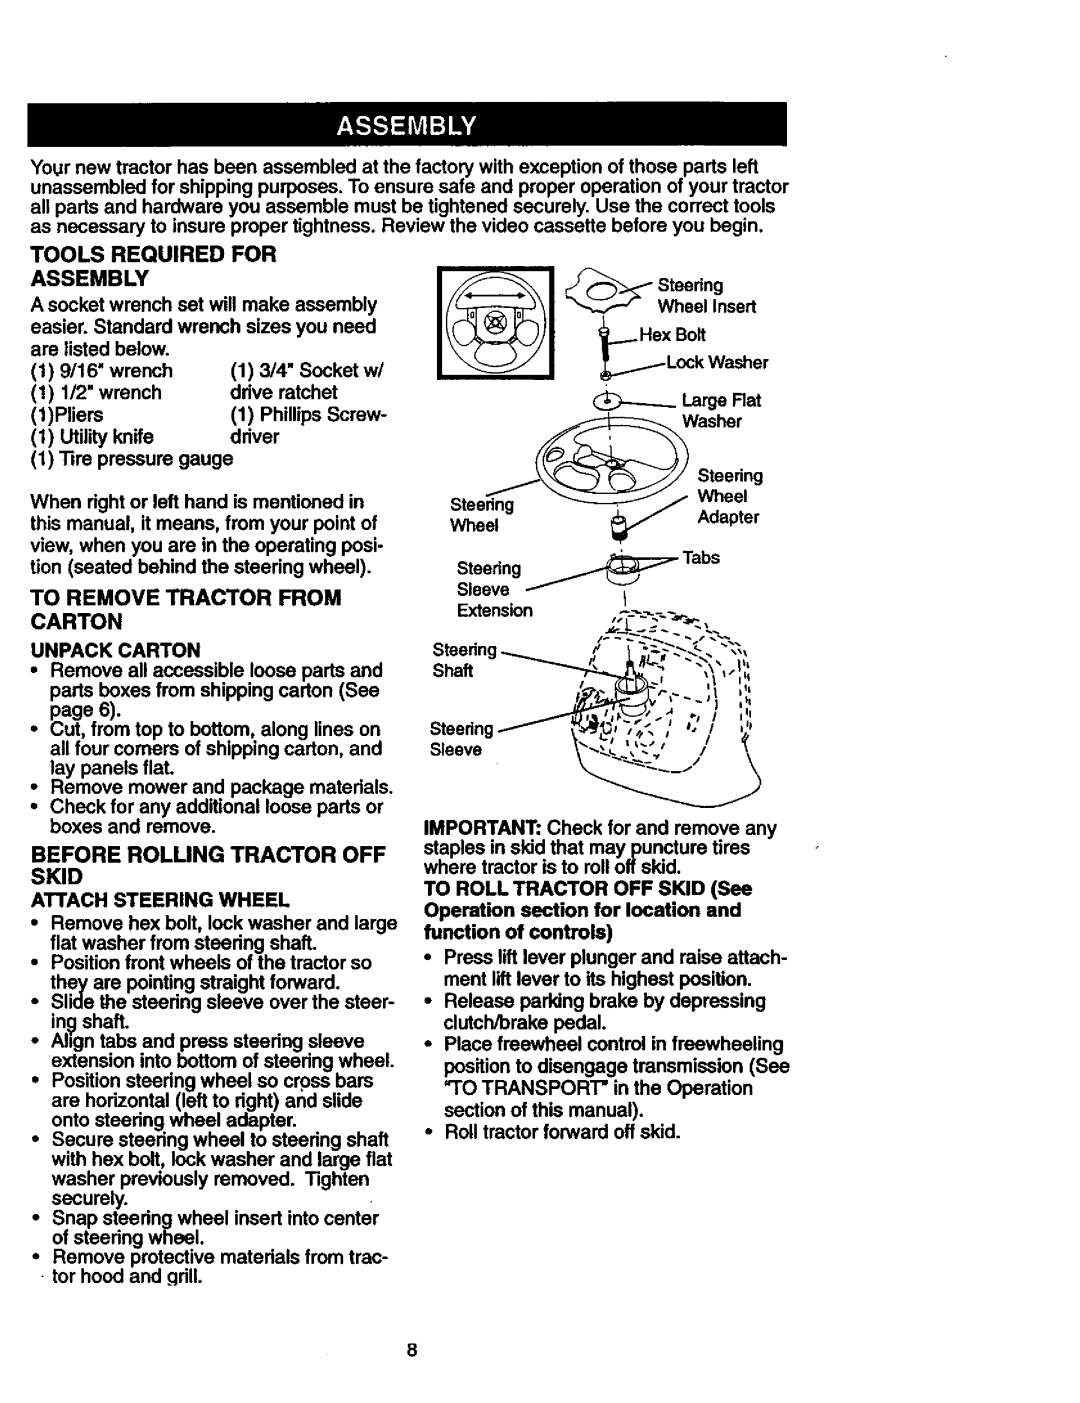 Craftsman 917.27306 owner manual Tools Required For Assembly, To Remove Tractor From Carton 